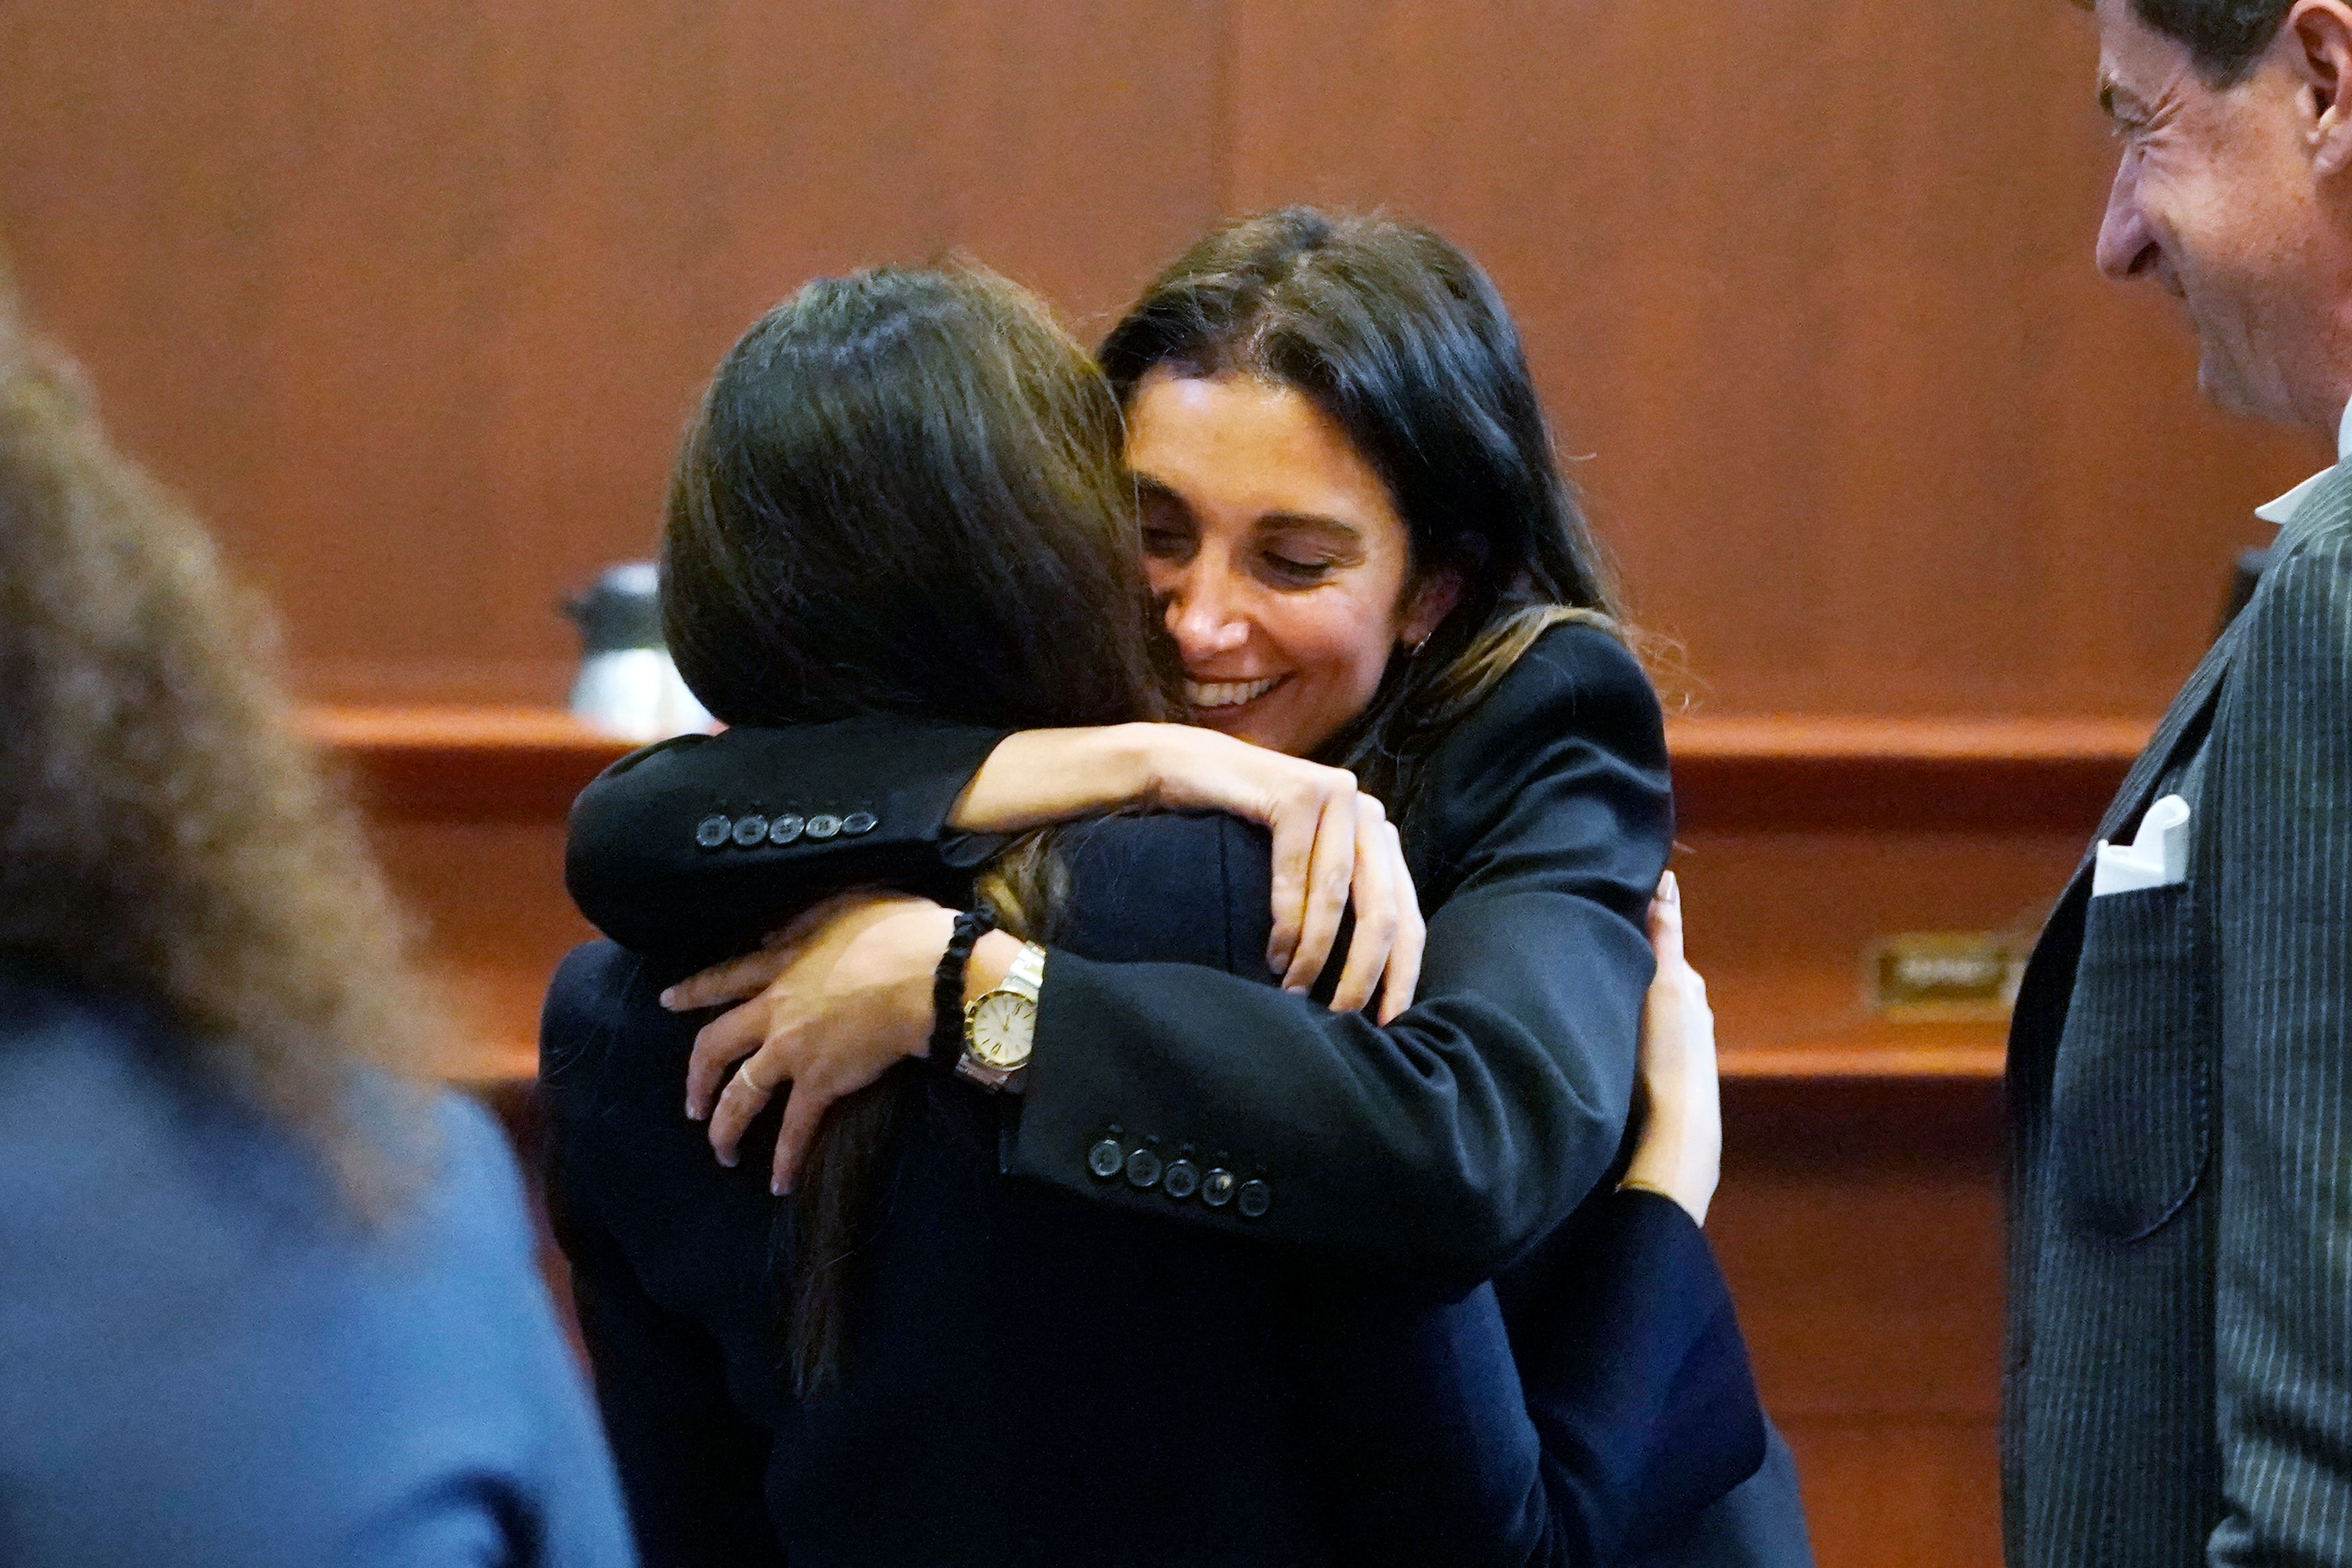 Joelle Rich pictured embracing attorney Camille Vasquez at the Fairfax County Circuit Courthouse on May 16, 2022 in Fairfax, Virginia | Source: Getty Images